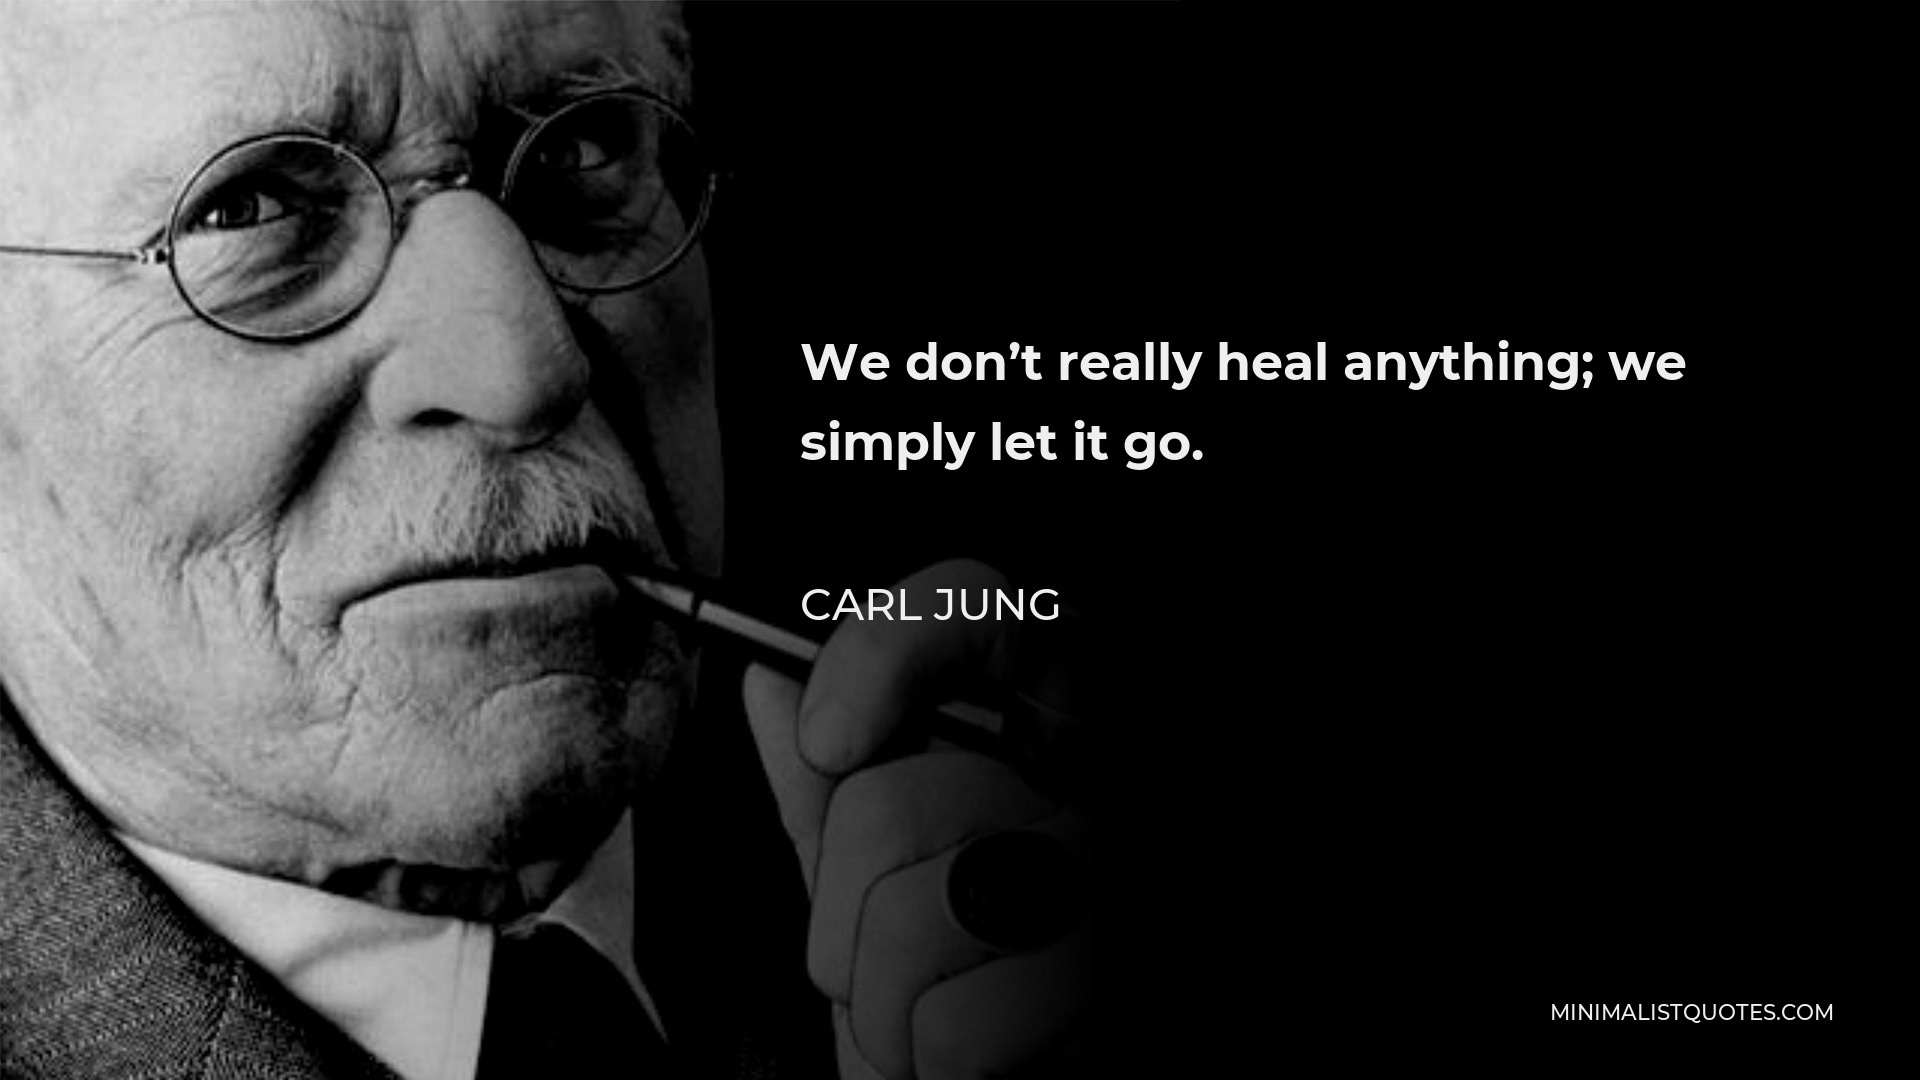 Carl Jung Quote - We don’t really heal anything; we simply let it go.